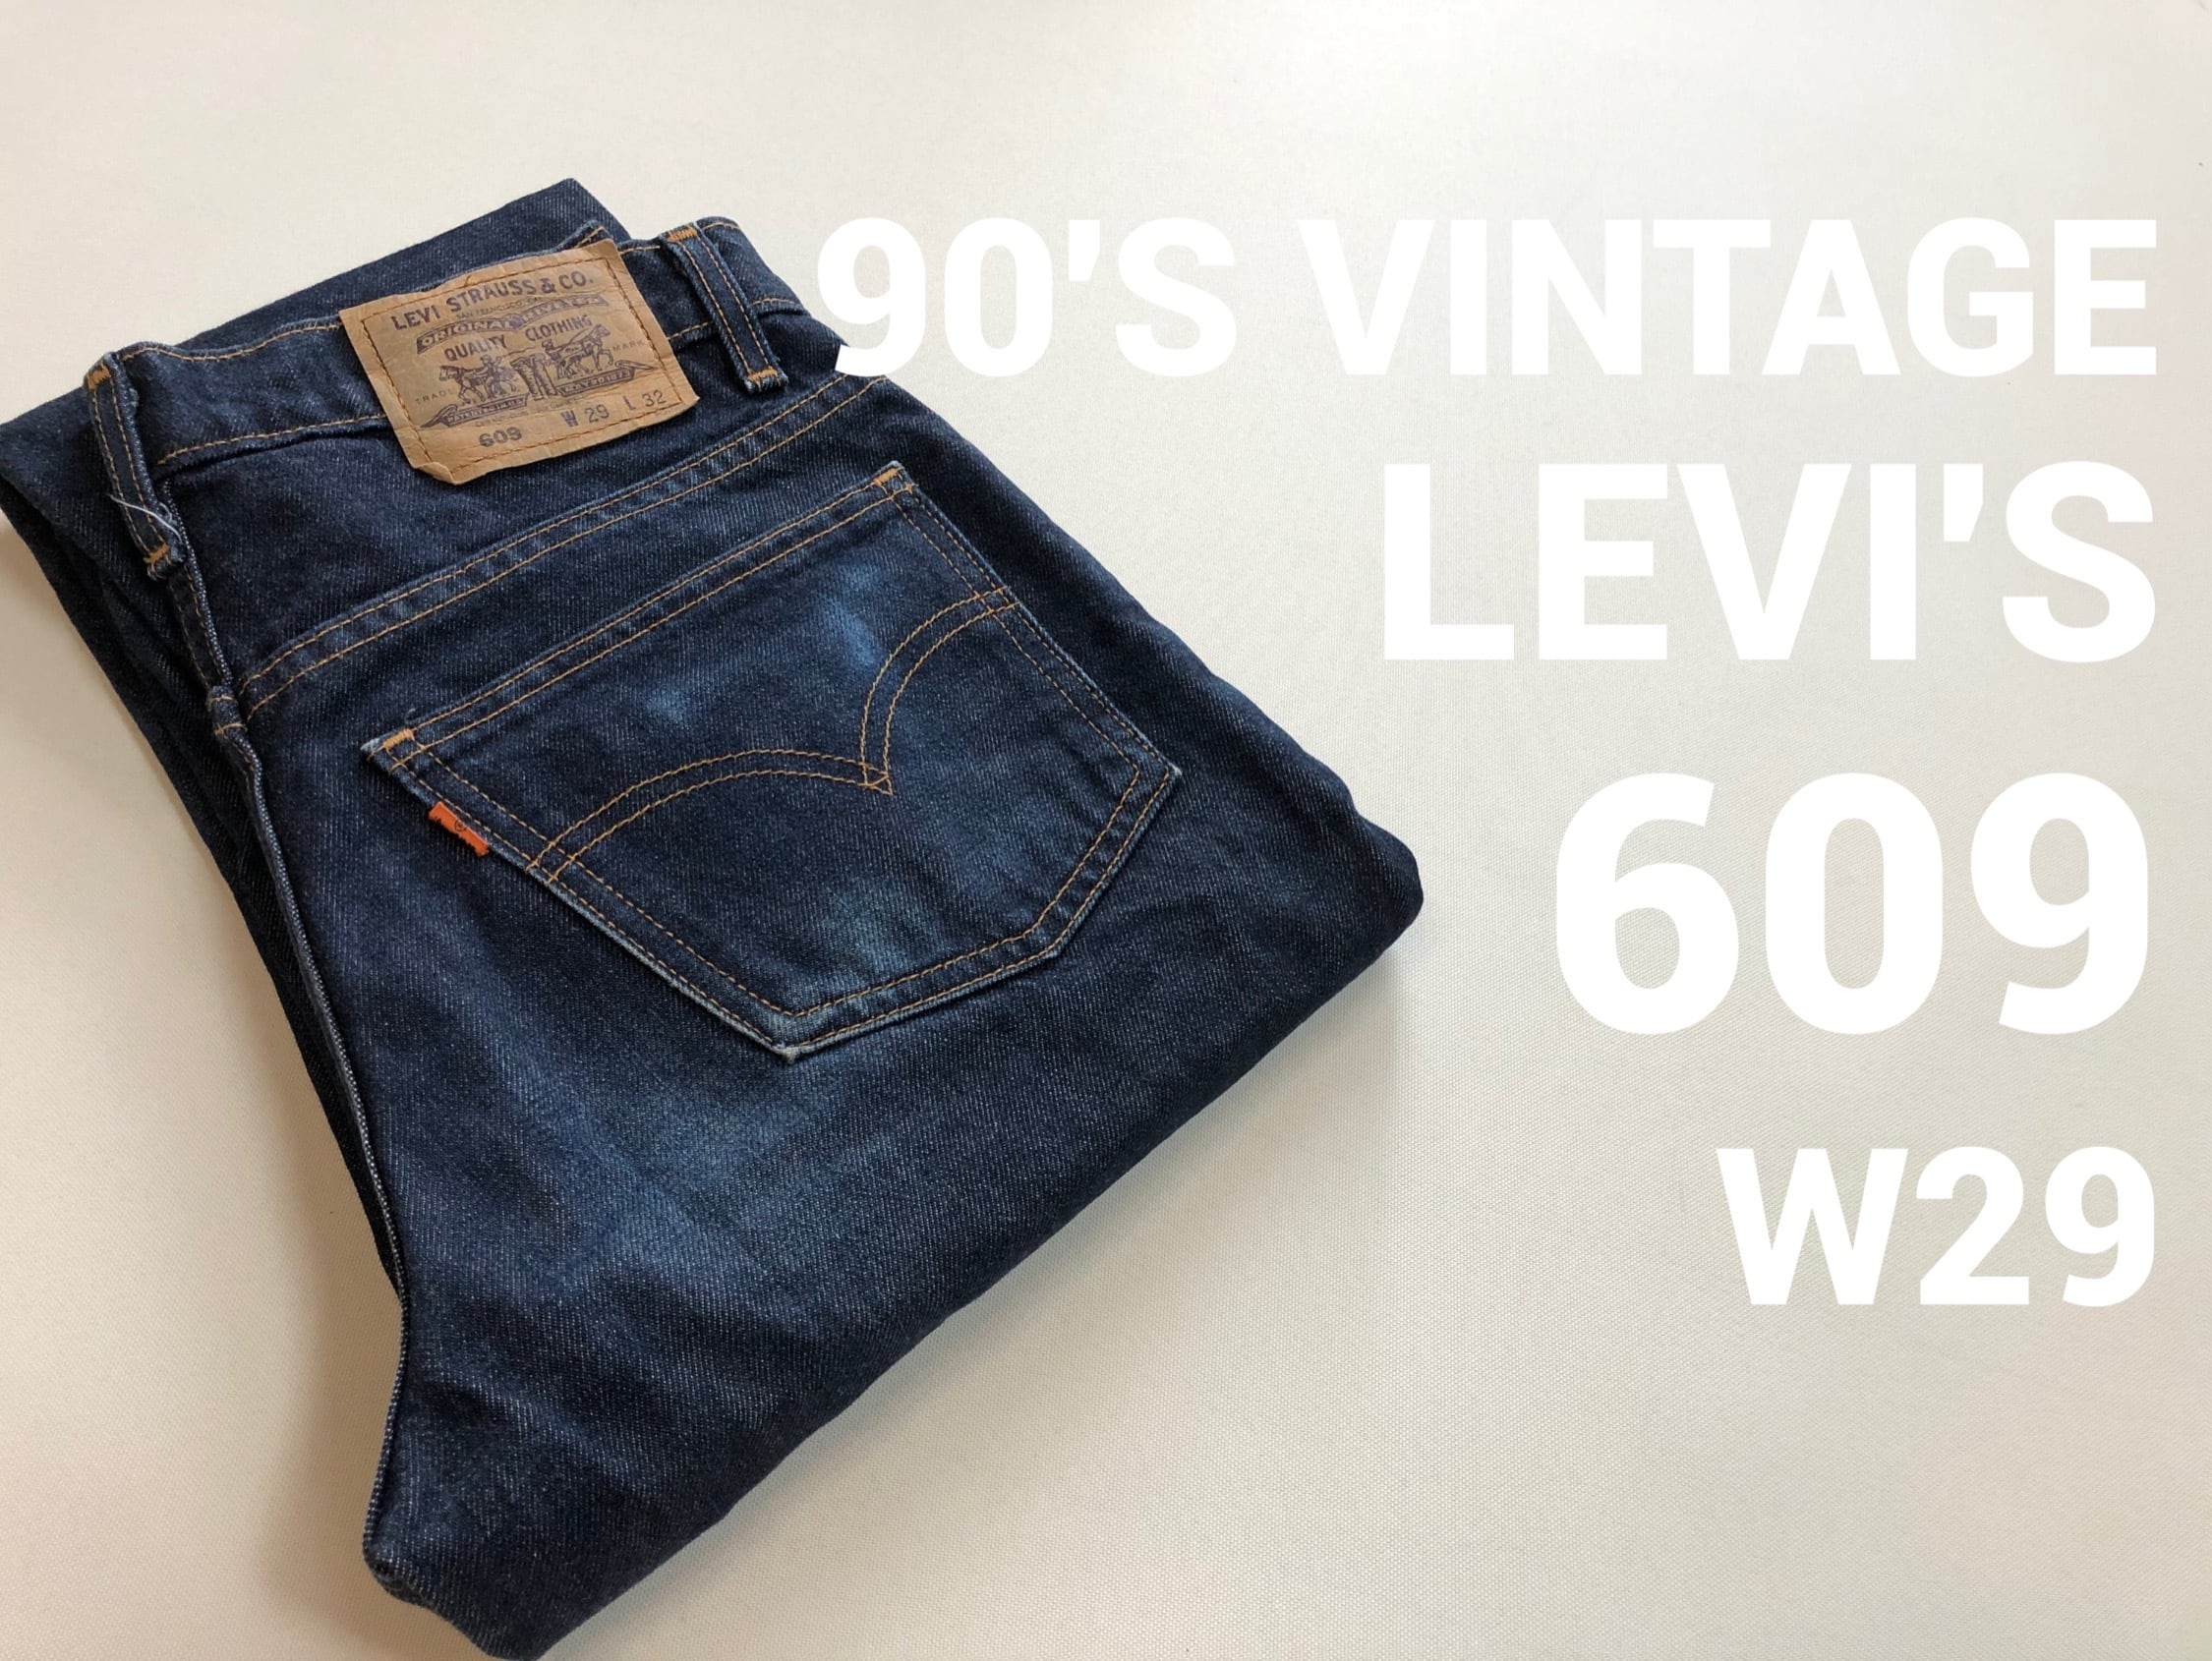 90's LEVI'S リーバイス 609 スリムデニム 303 | ＳＥＣＯＮＤ HAND RED